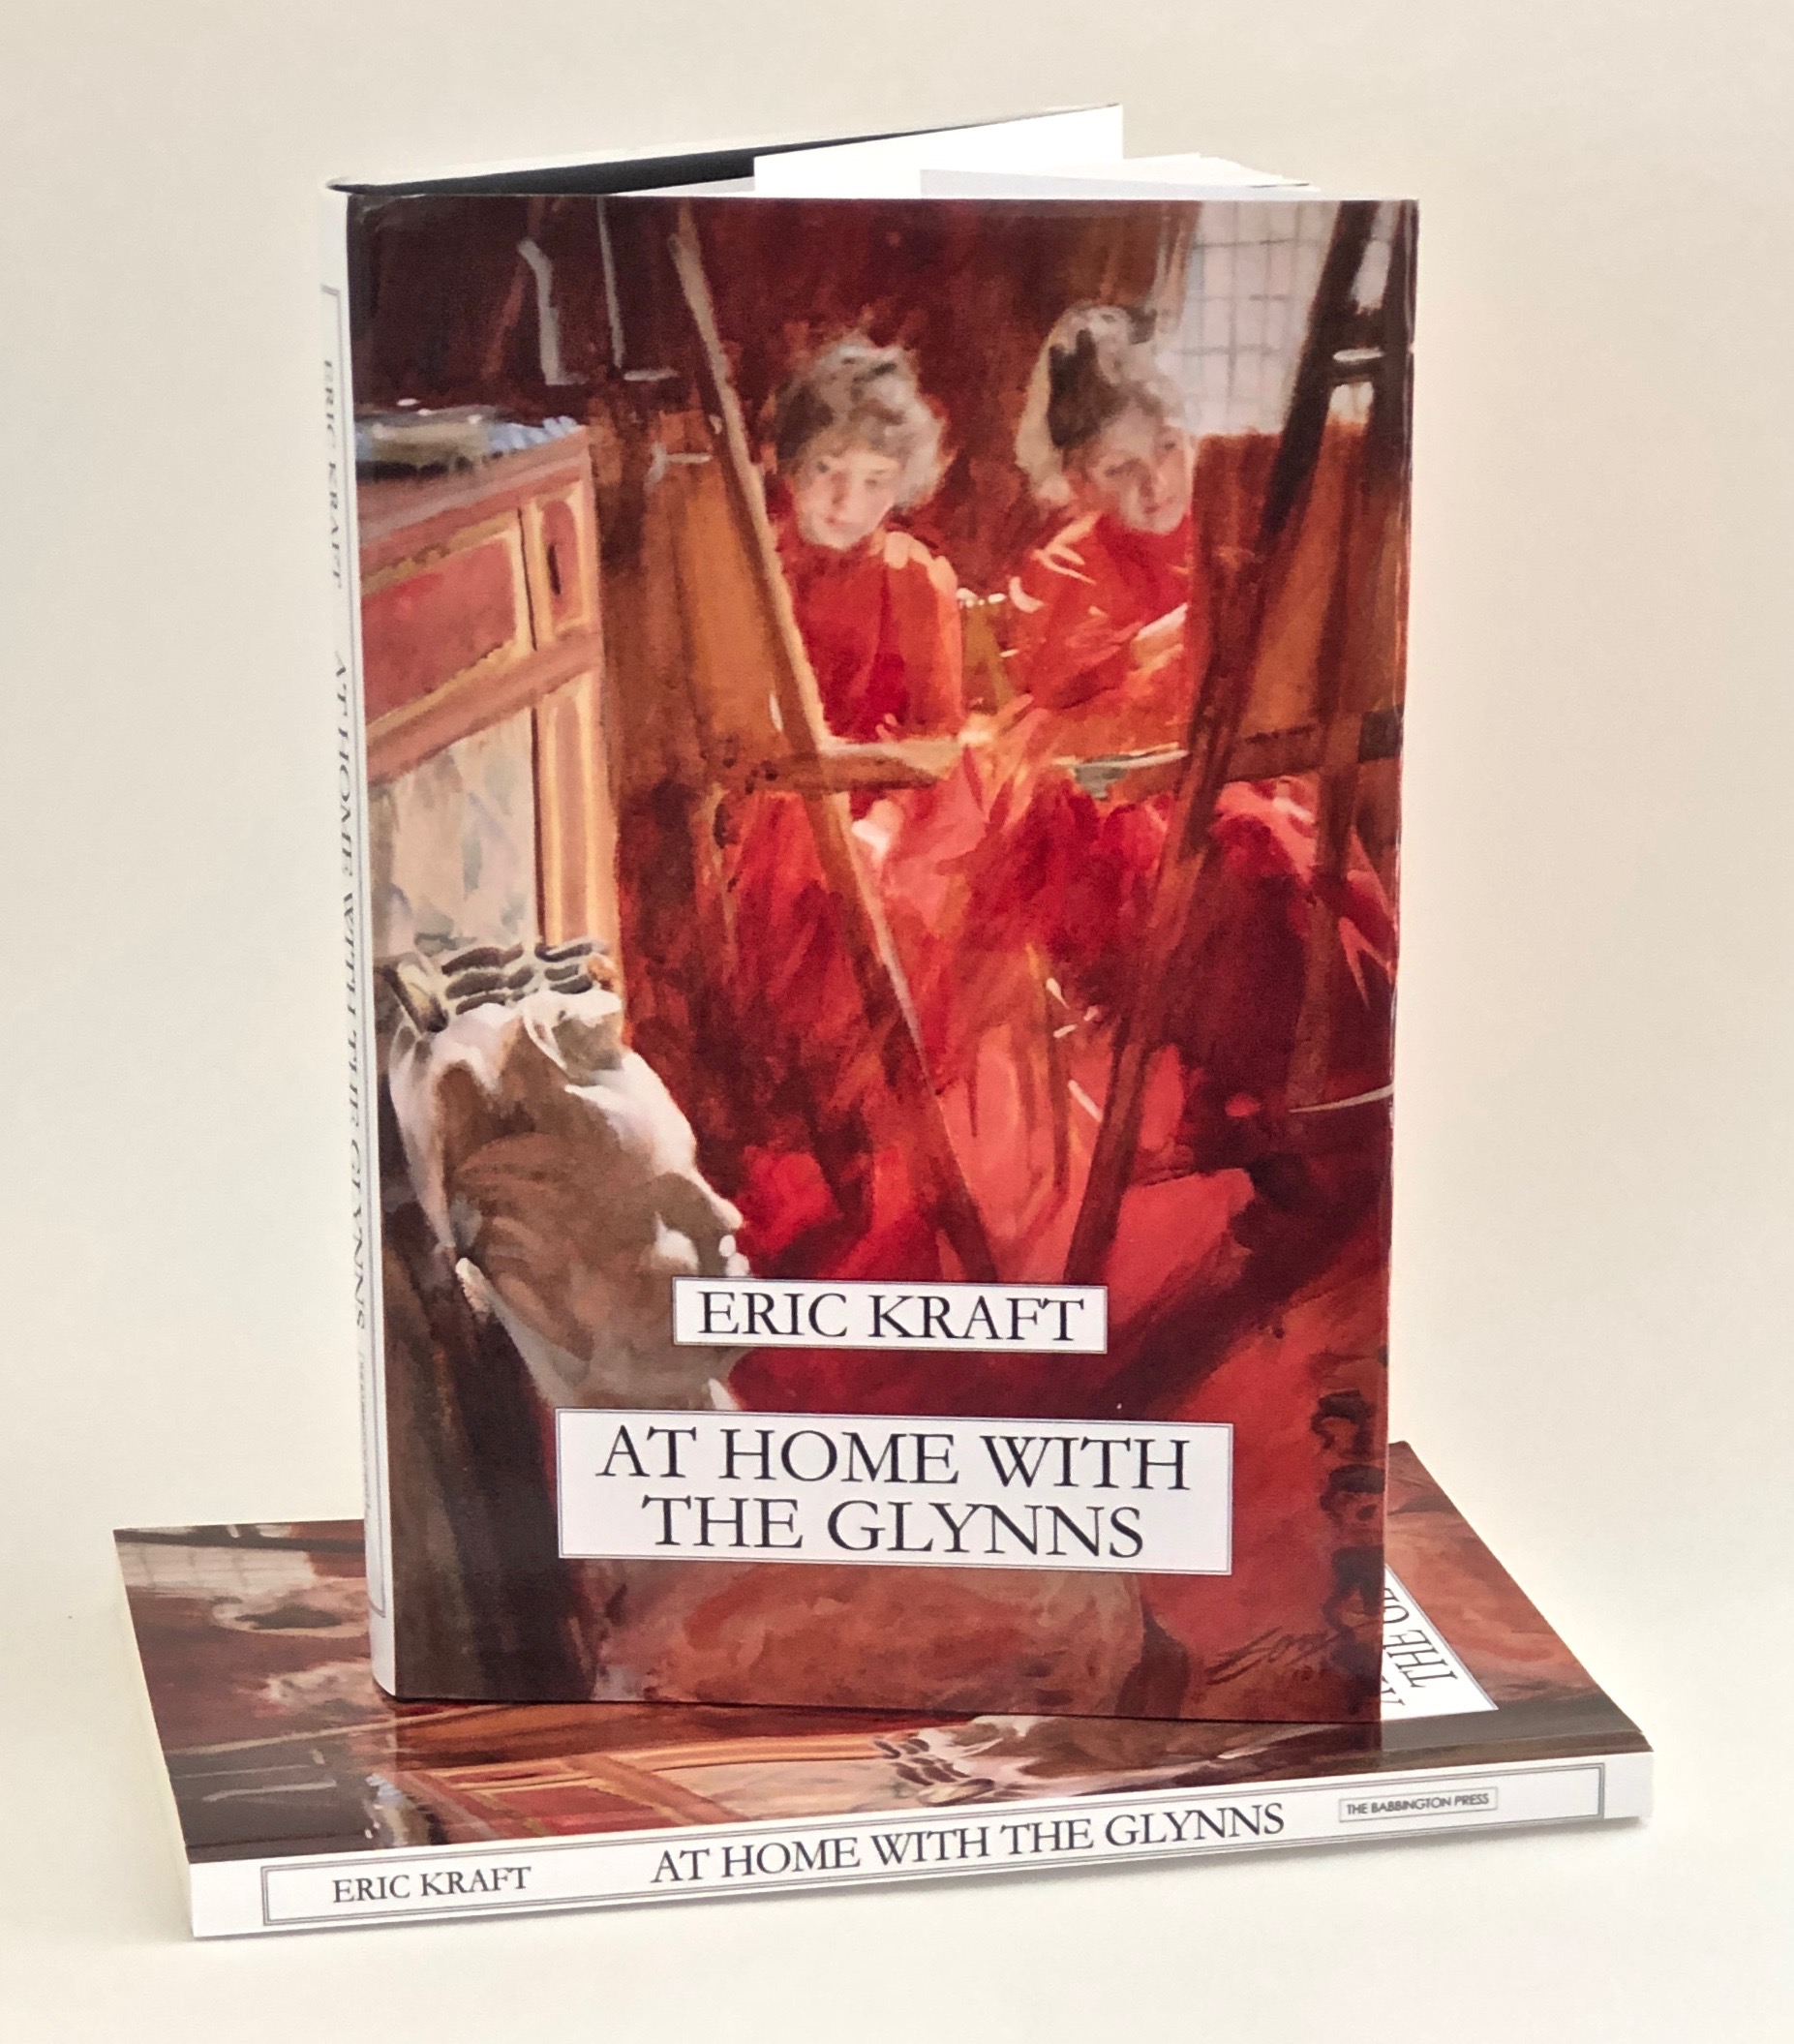 At Home with the Glynns, paperback and hardcover